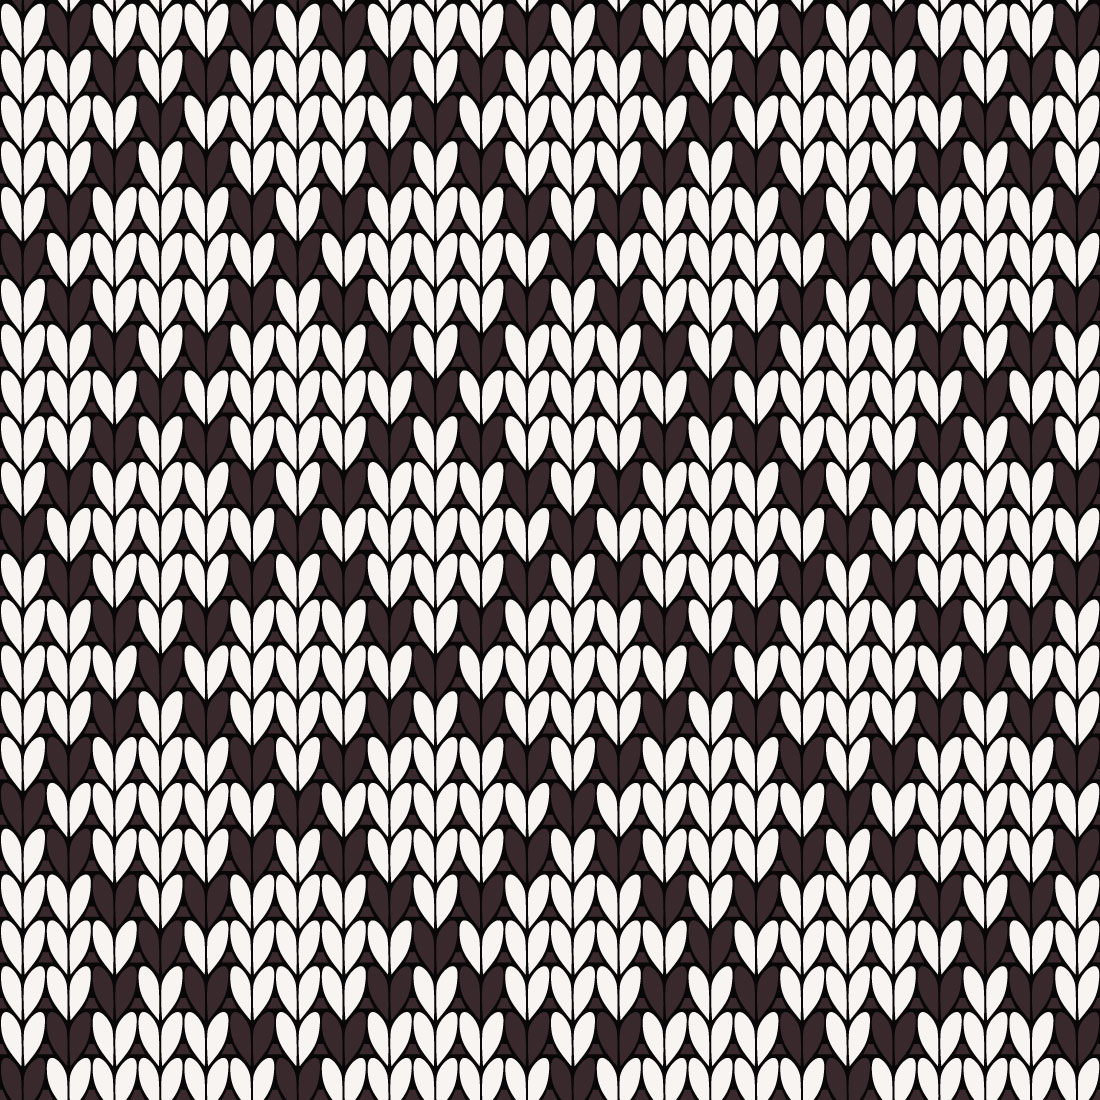 Seamless Houndstooth Pattern In Brown Tones. Vector Image. Royalty